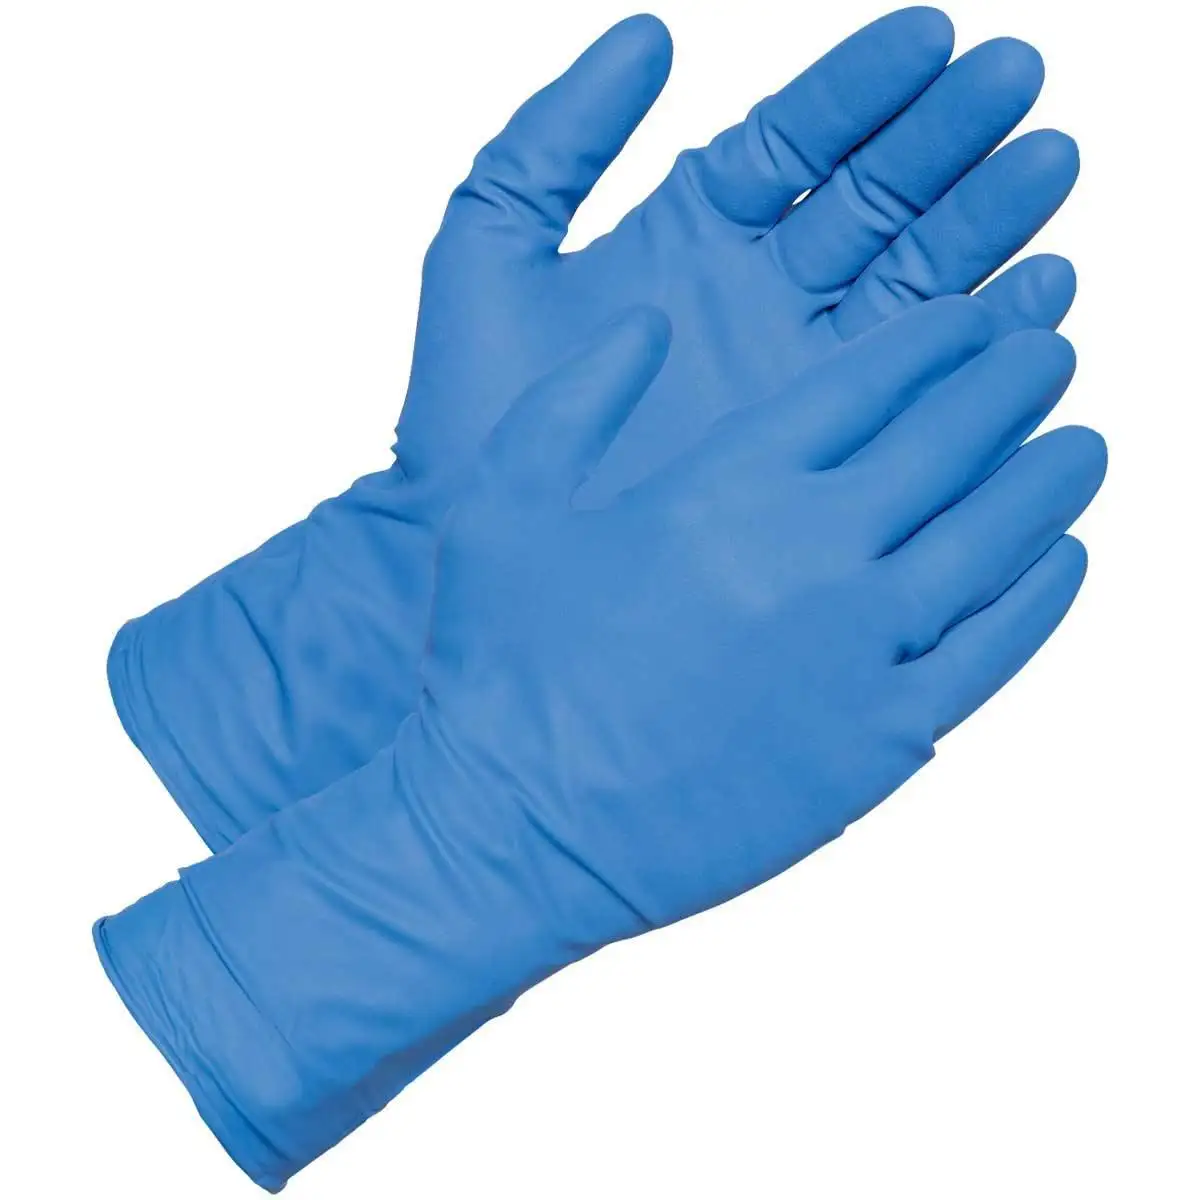 Good quality disposable nitrile rubber glovees industrial labor nitrile safety work glovees